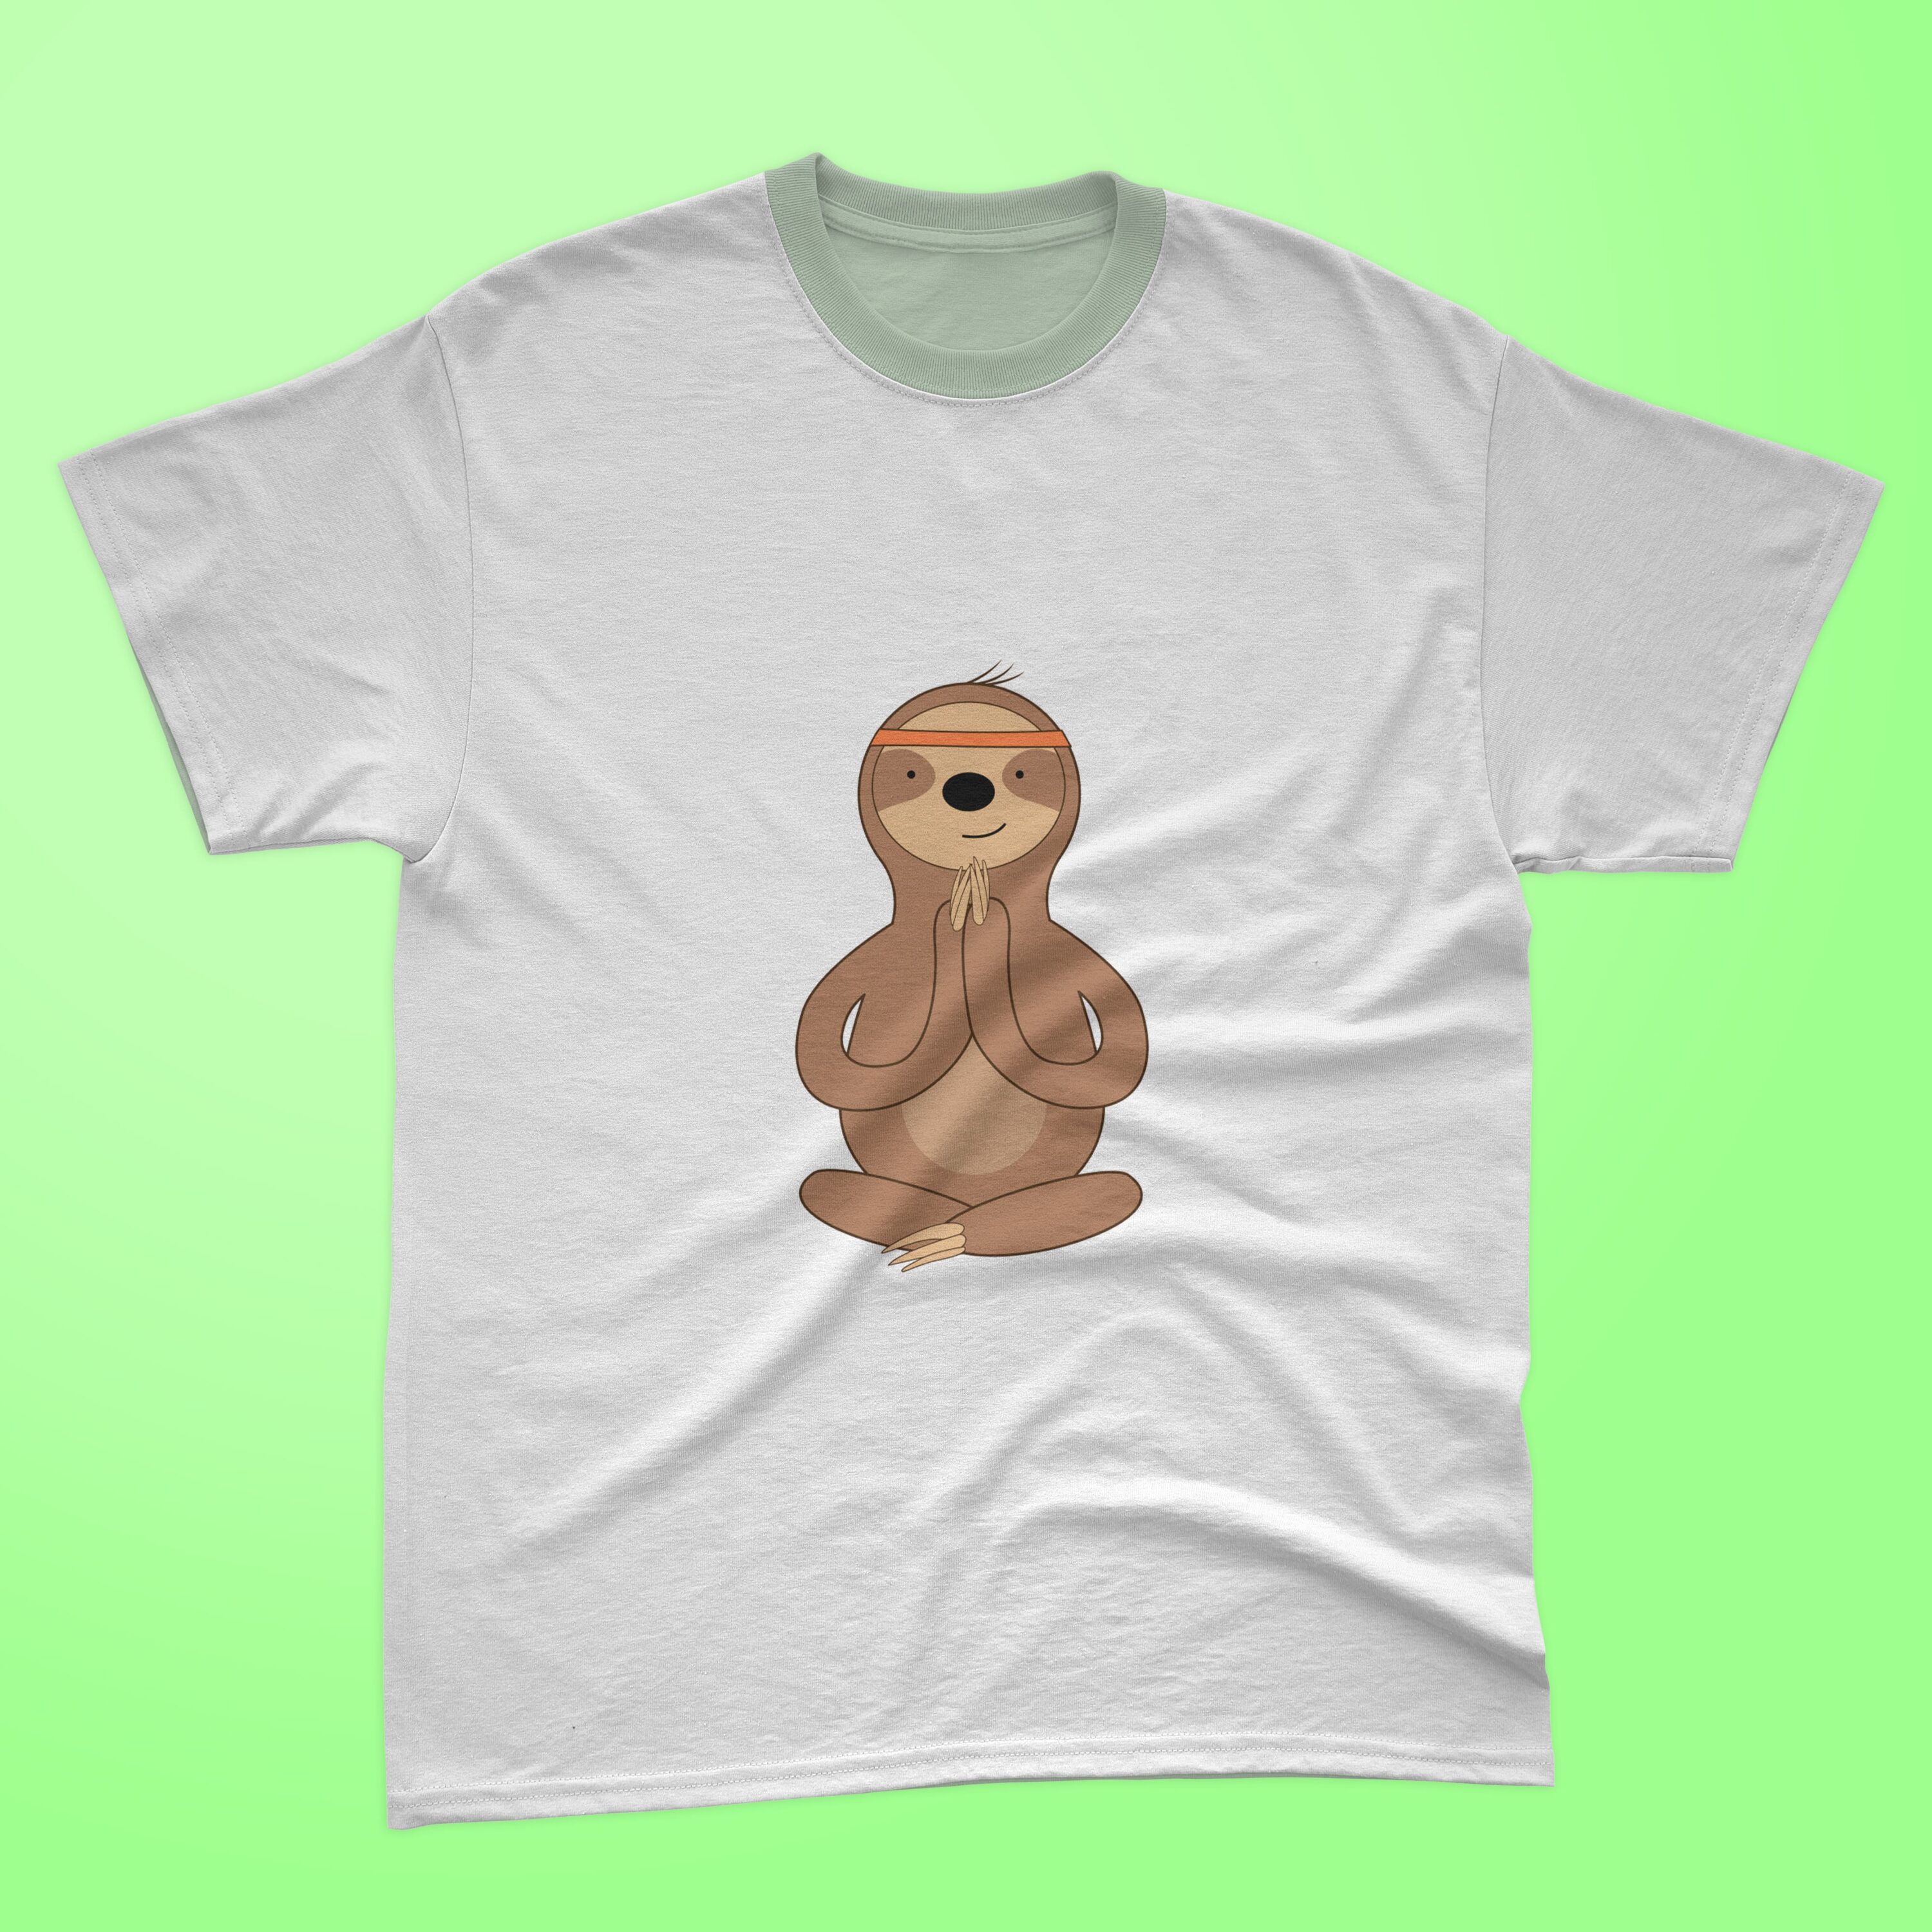 Image of a white t-shirt with a colorful print of a sloth doing yoga.